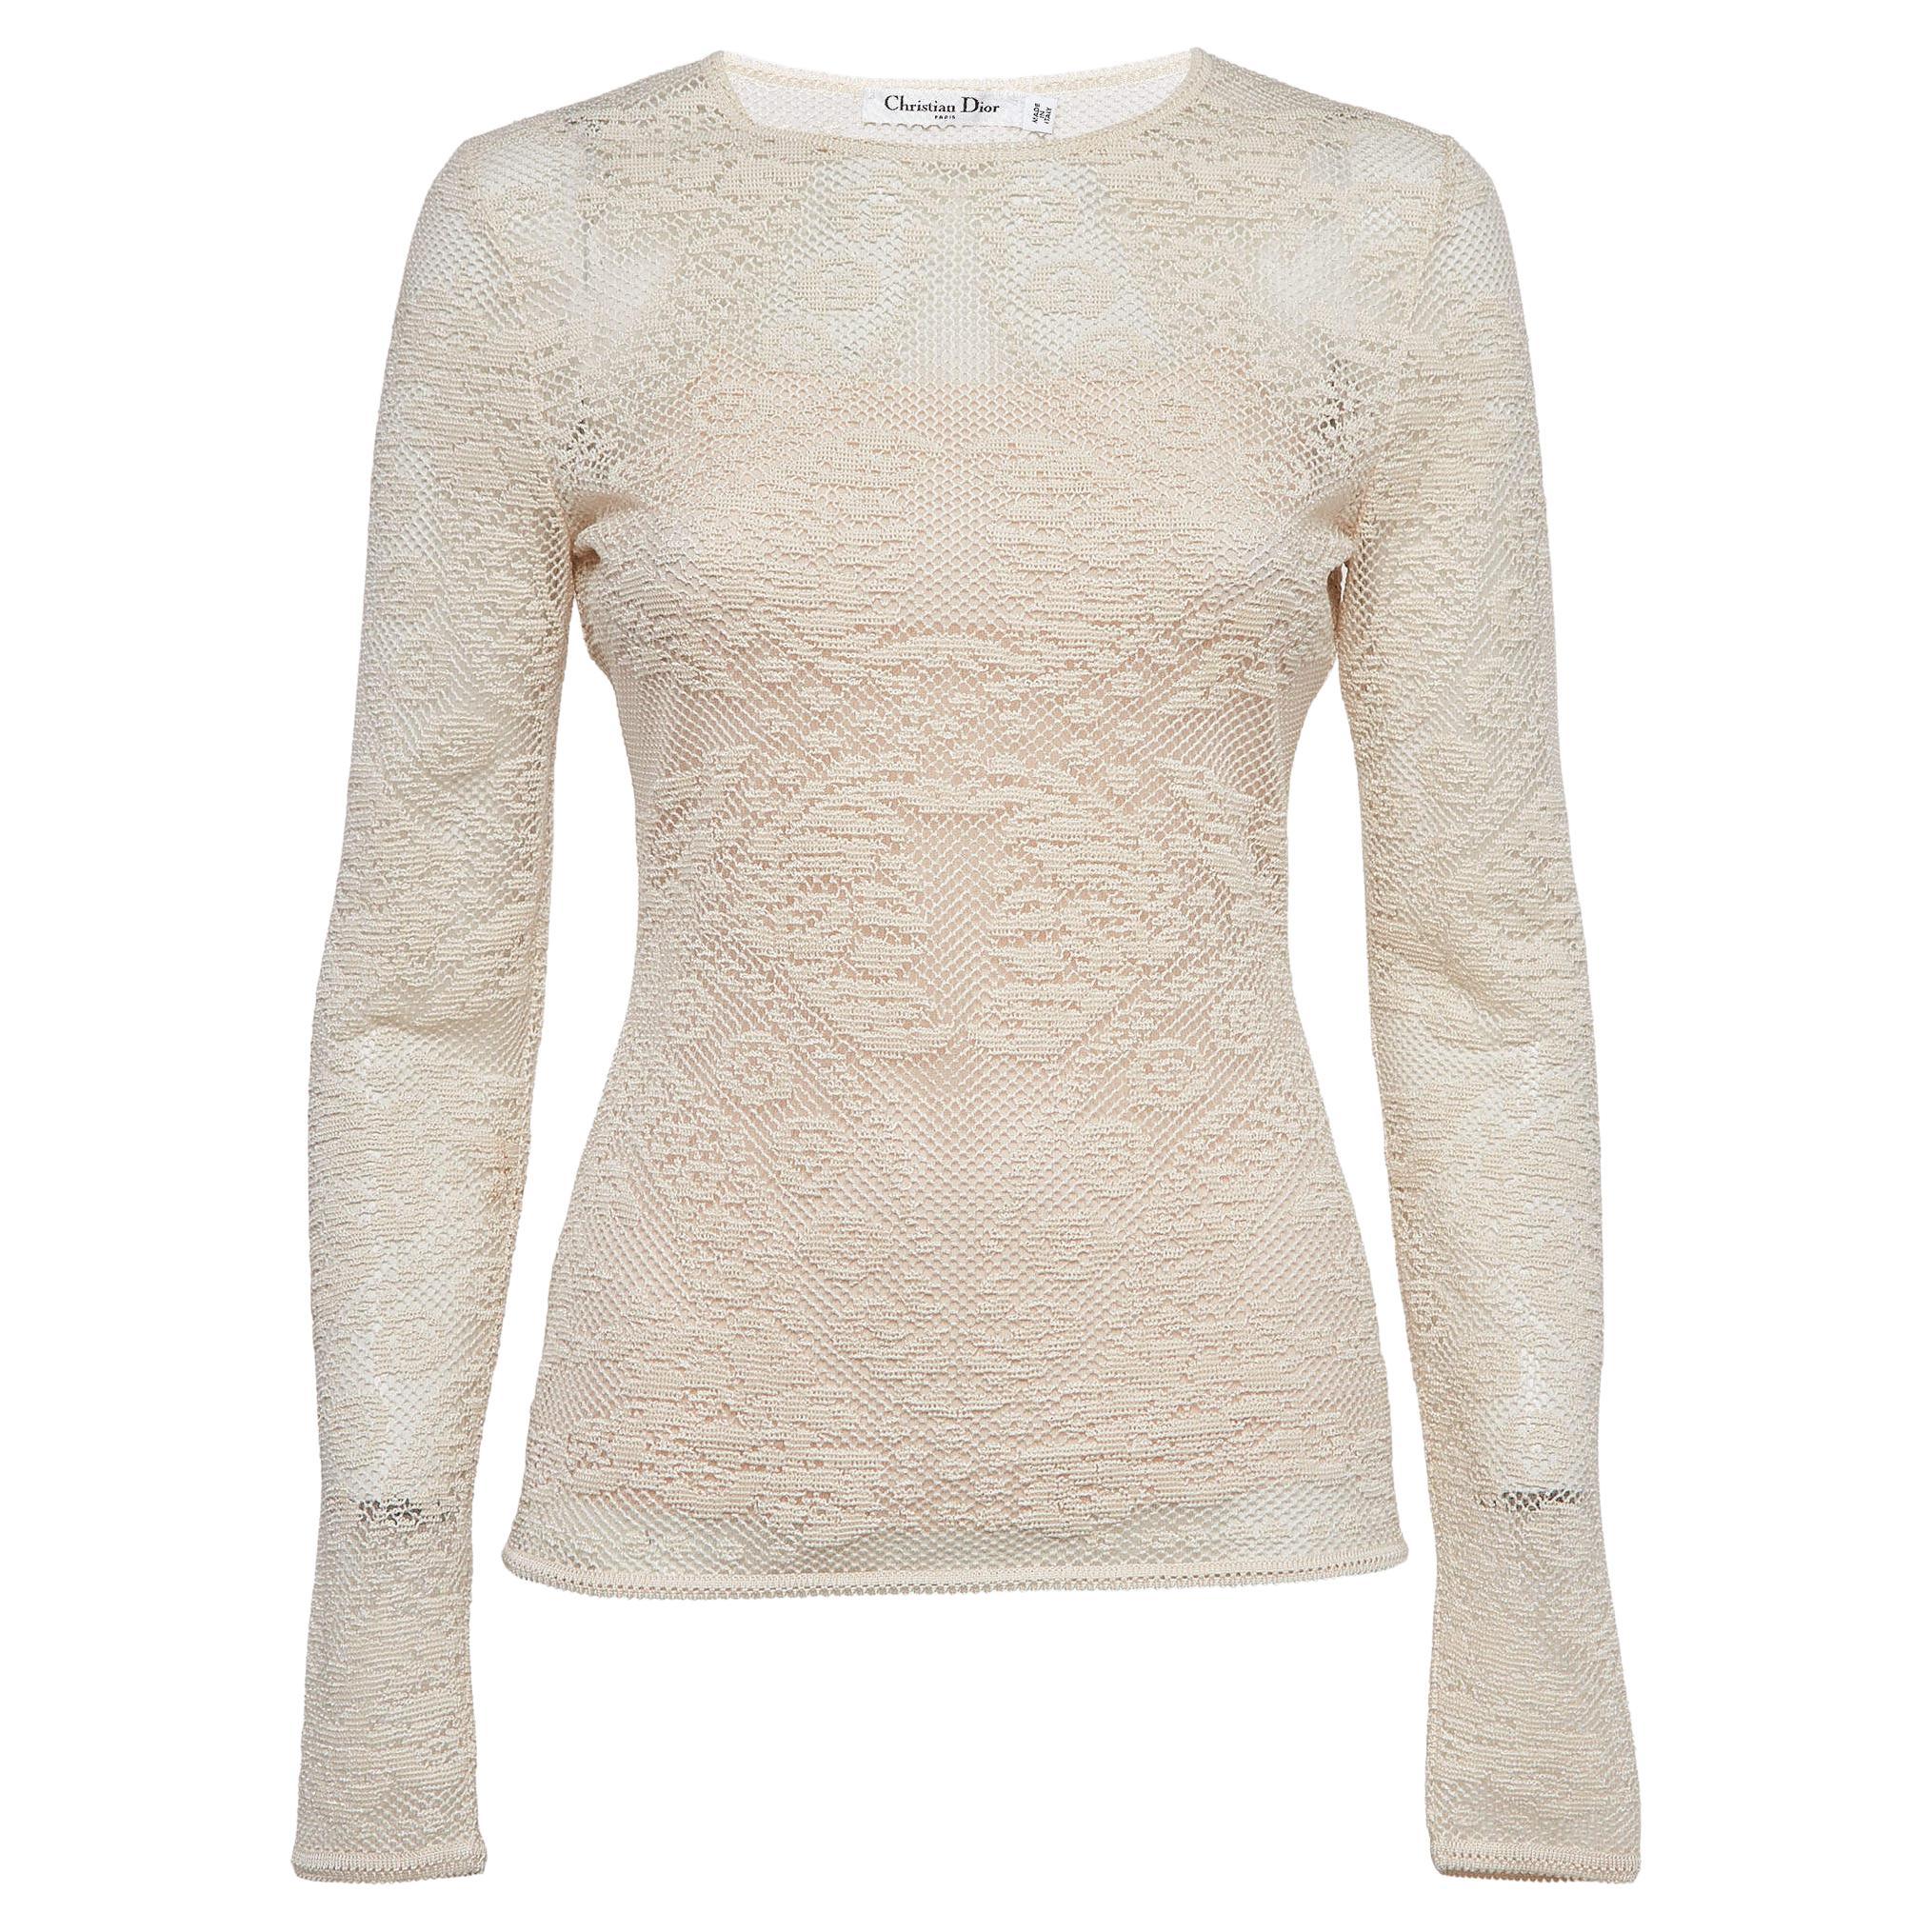 Christian Dior Beige Tulle and Crochet Emi Sheer Top M For Sale